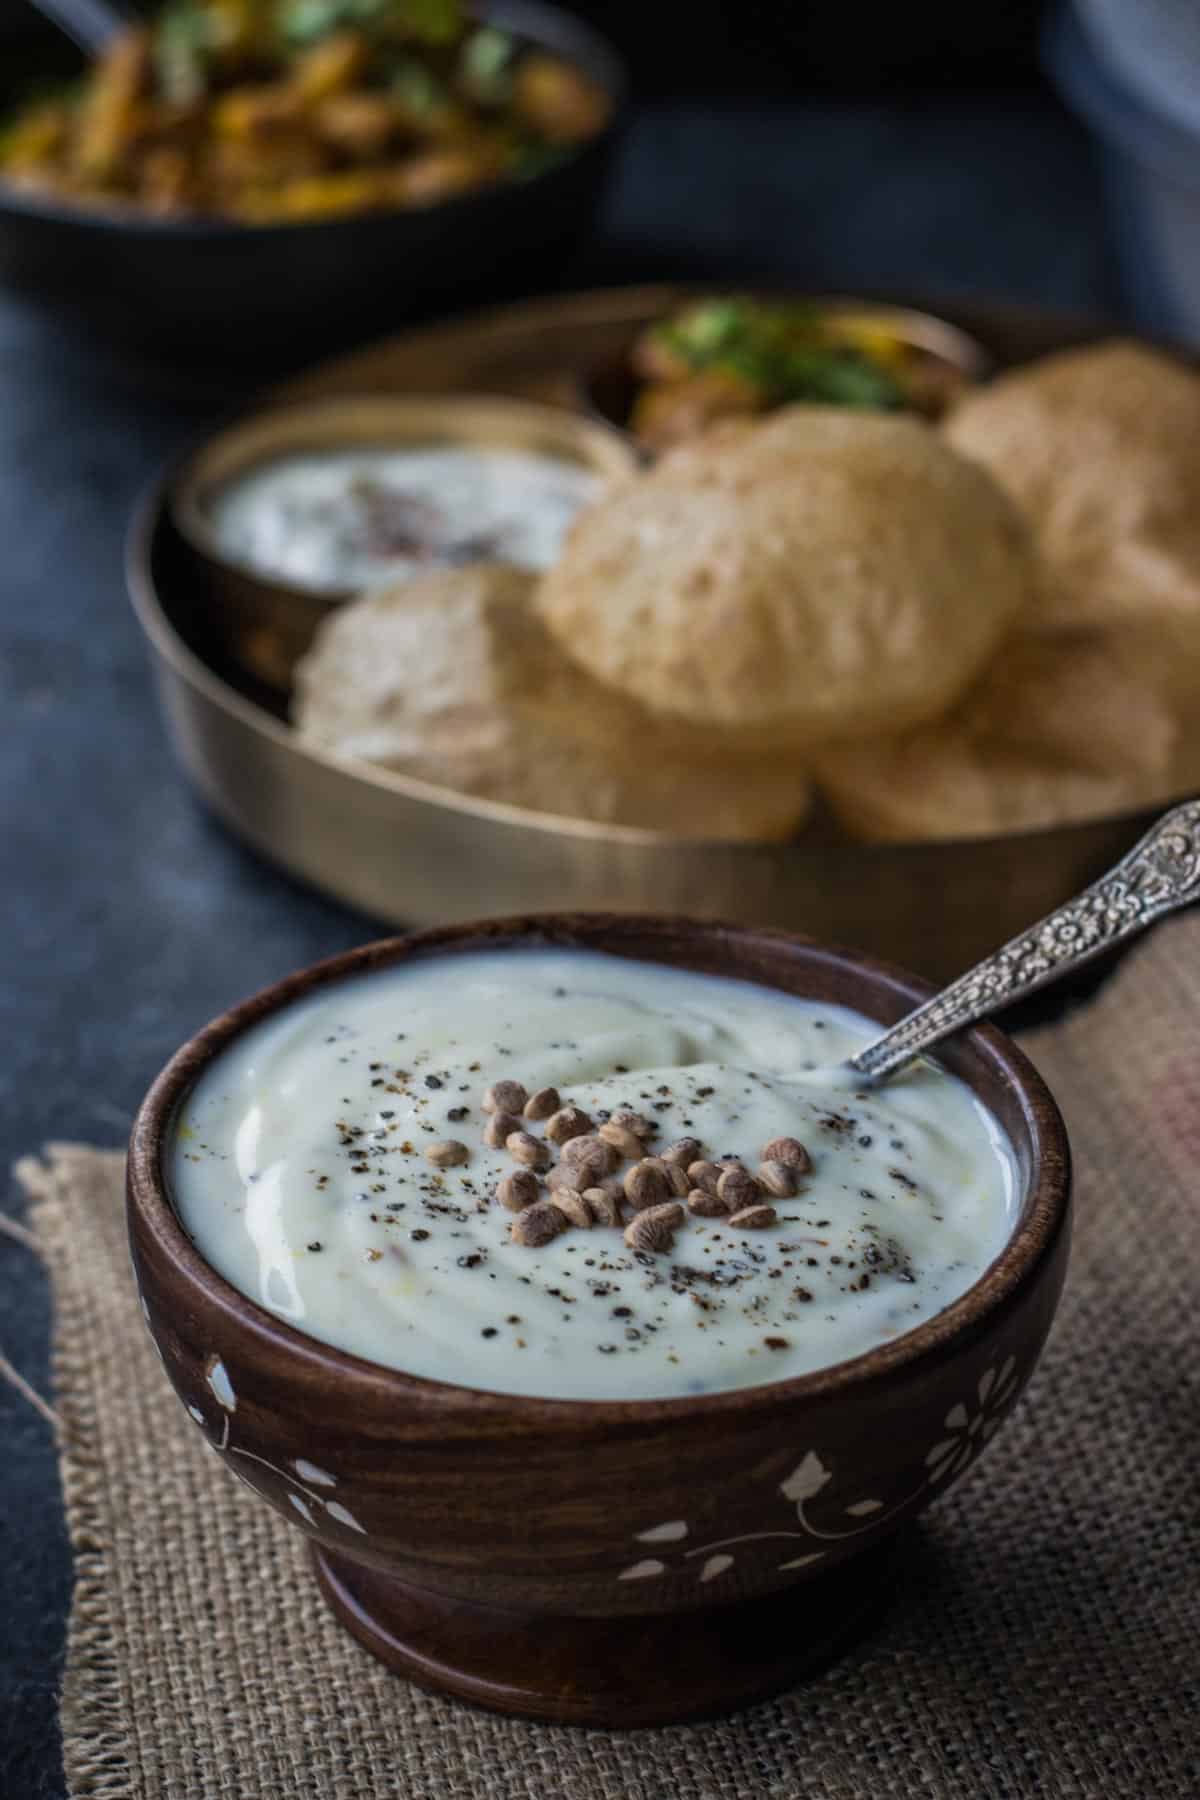 Shrikhand served in a wooden bowl